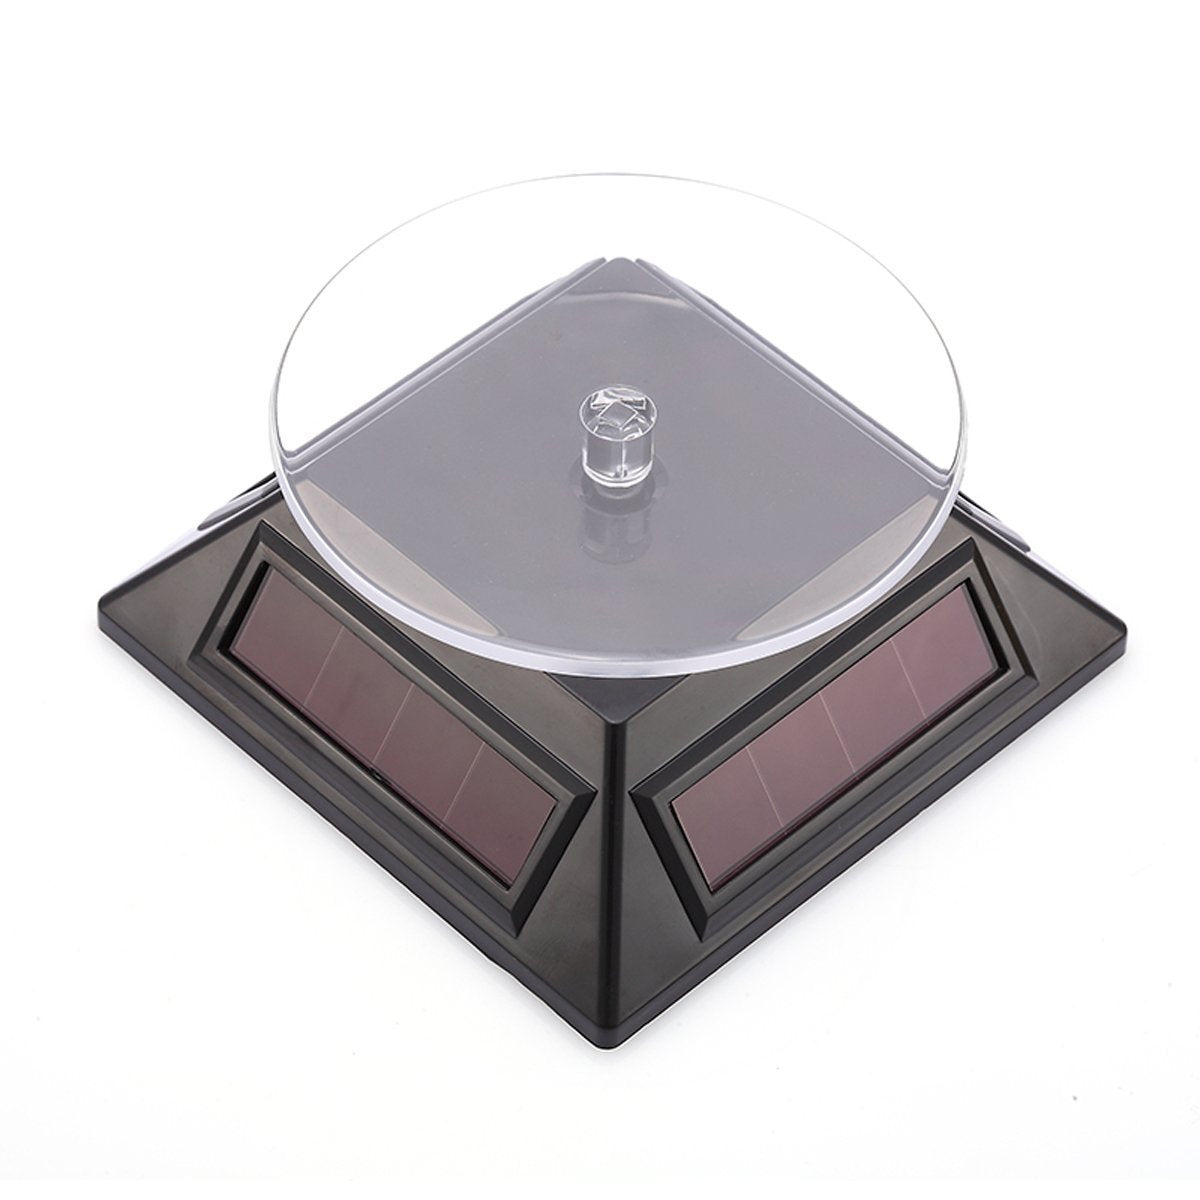 Leadleds Rotating Display Stand Jewelry Turntable by Solar Energy and Battery Operated, 2-Pack - Leadleds